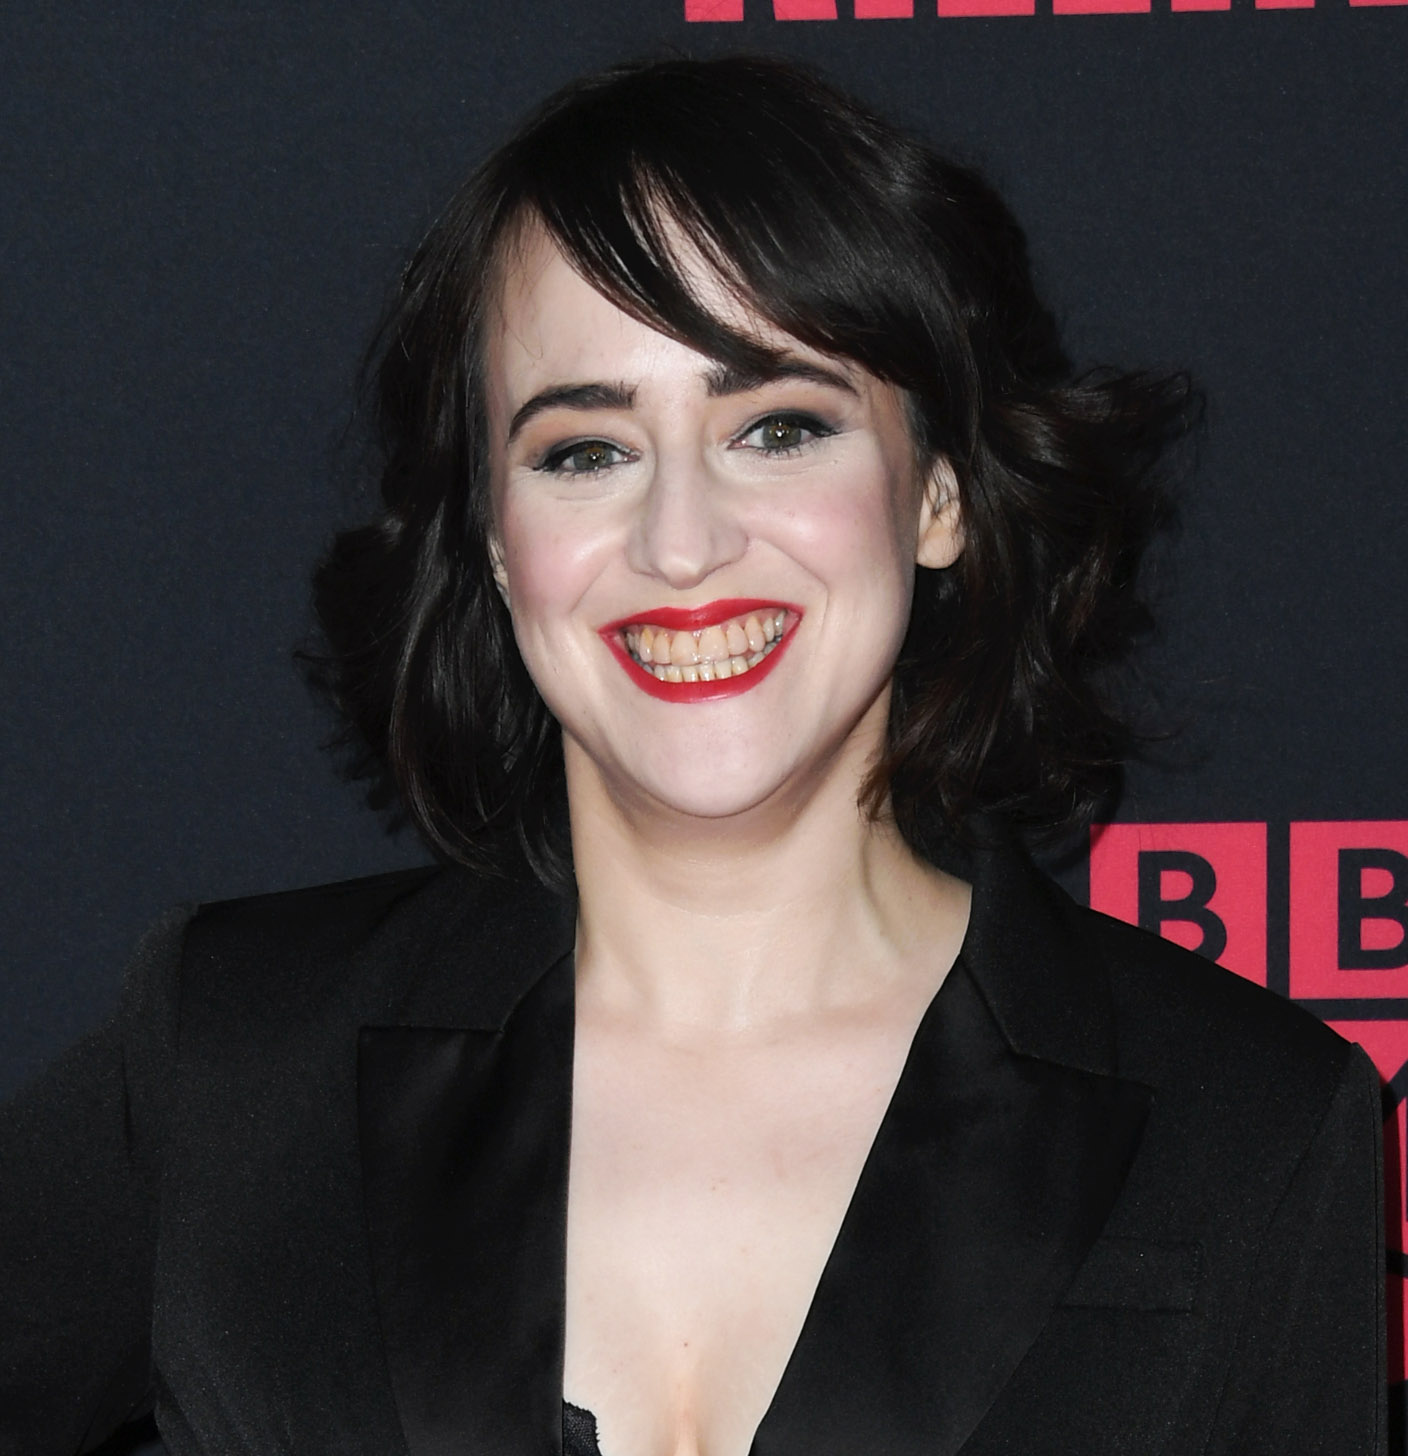 Mara Wilson attends the premiere of BBC America and AMC's "Killing Eve" Season 2 in Hollywood, California, on April 1, 2019. | Source: Getty Images